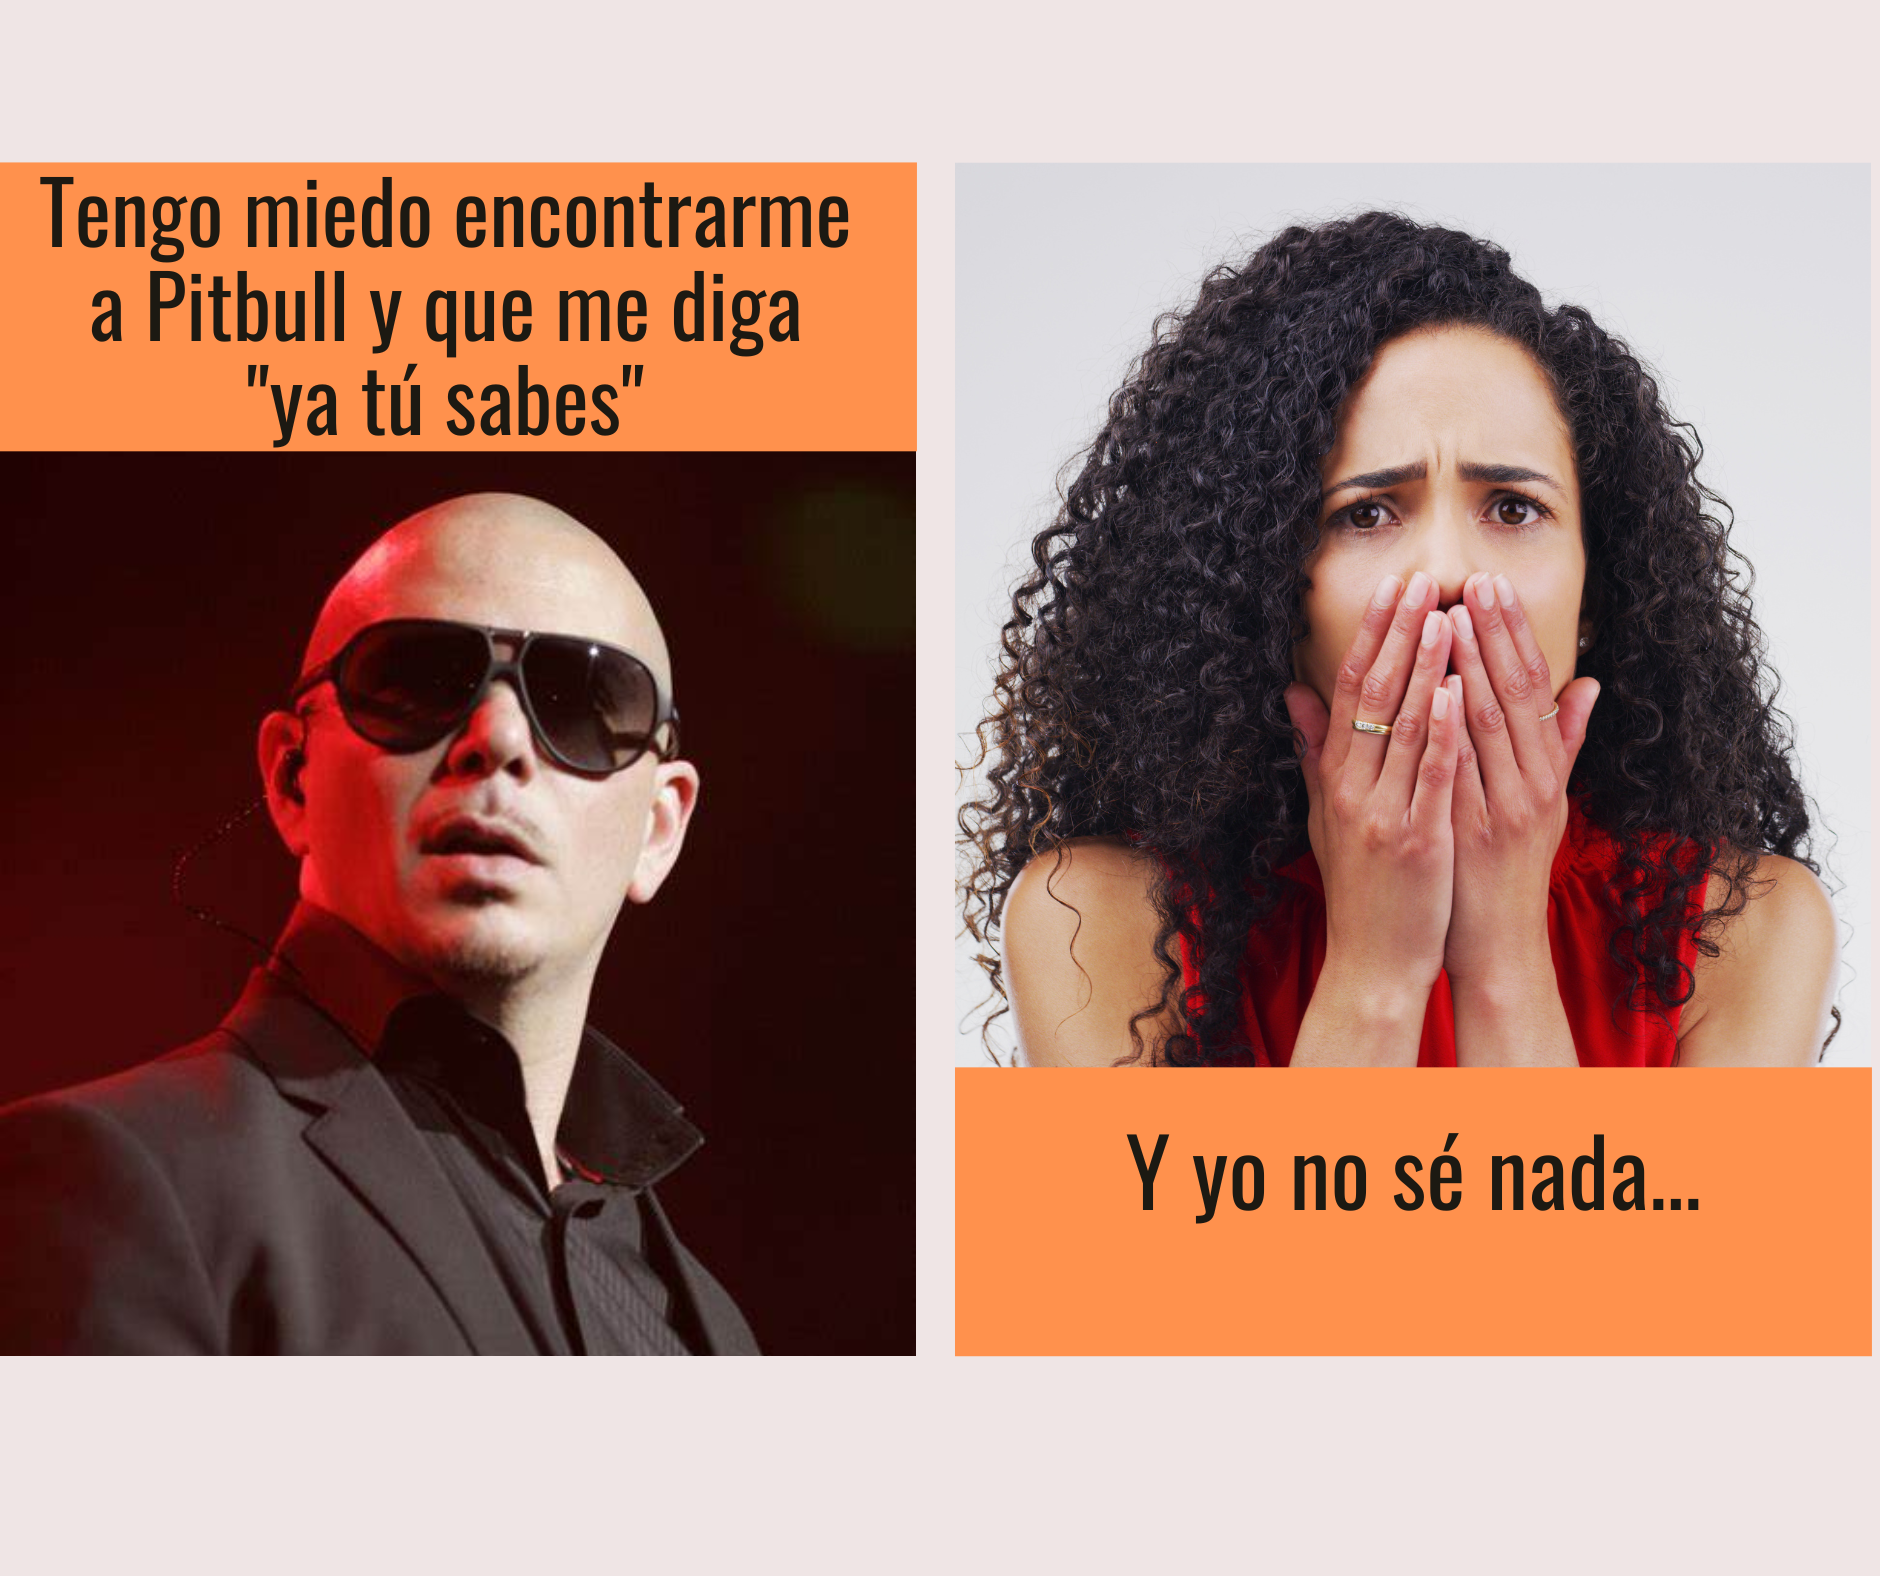 A meme. On one side there is a picture of singer Pit Bull. On the other side there is a picture of a woman with curly hair with an expression of surprise and her hands on her mouth.